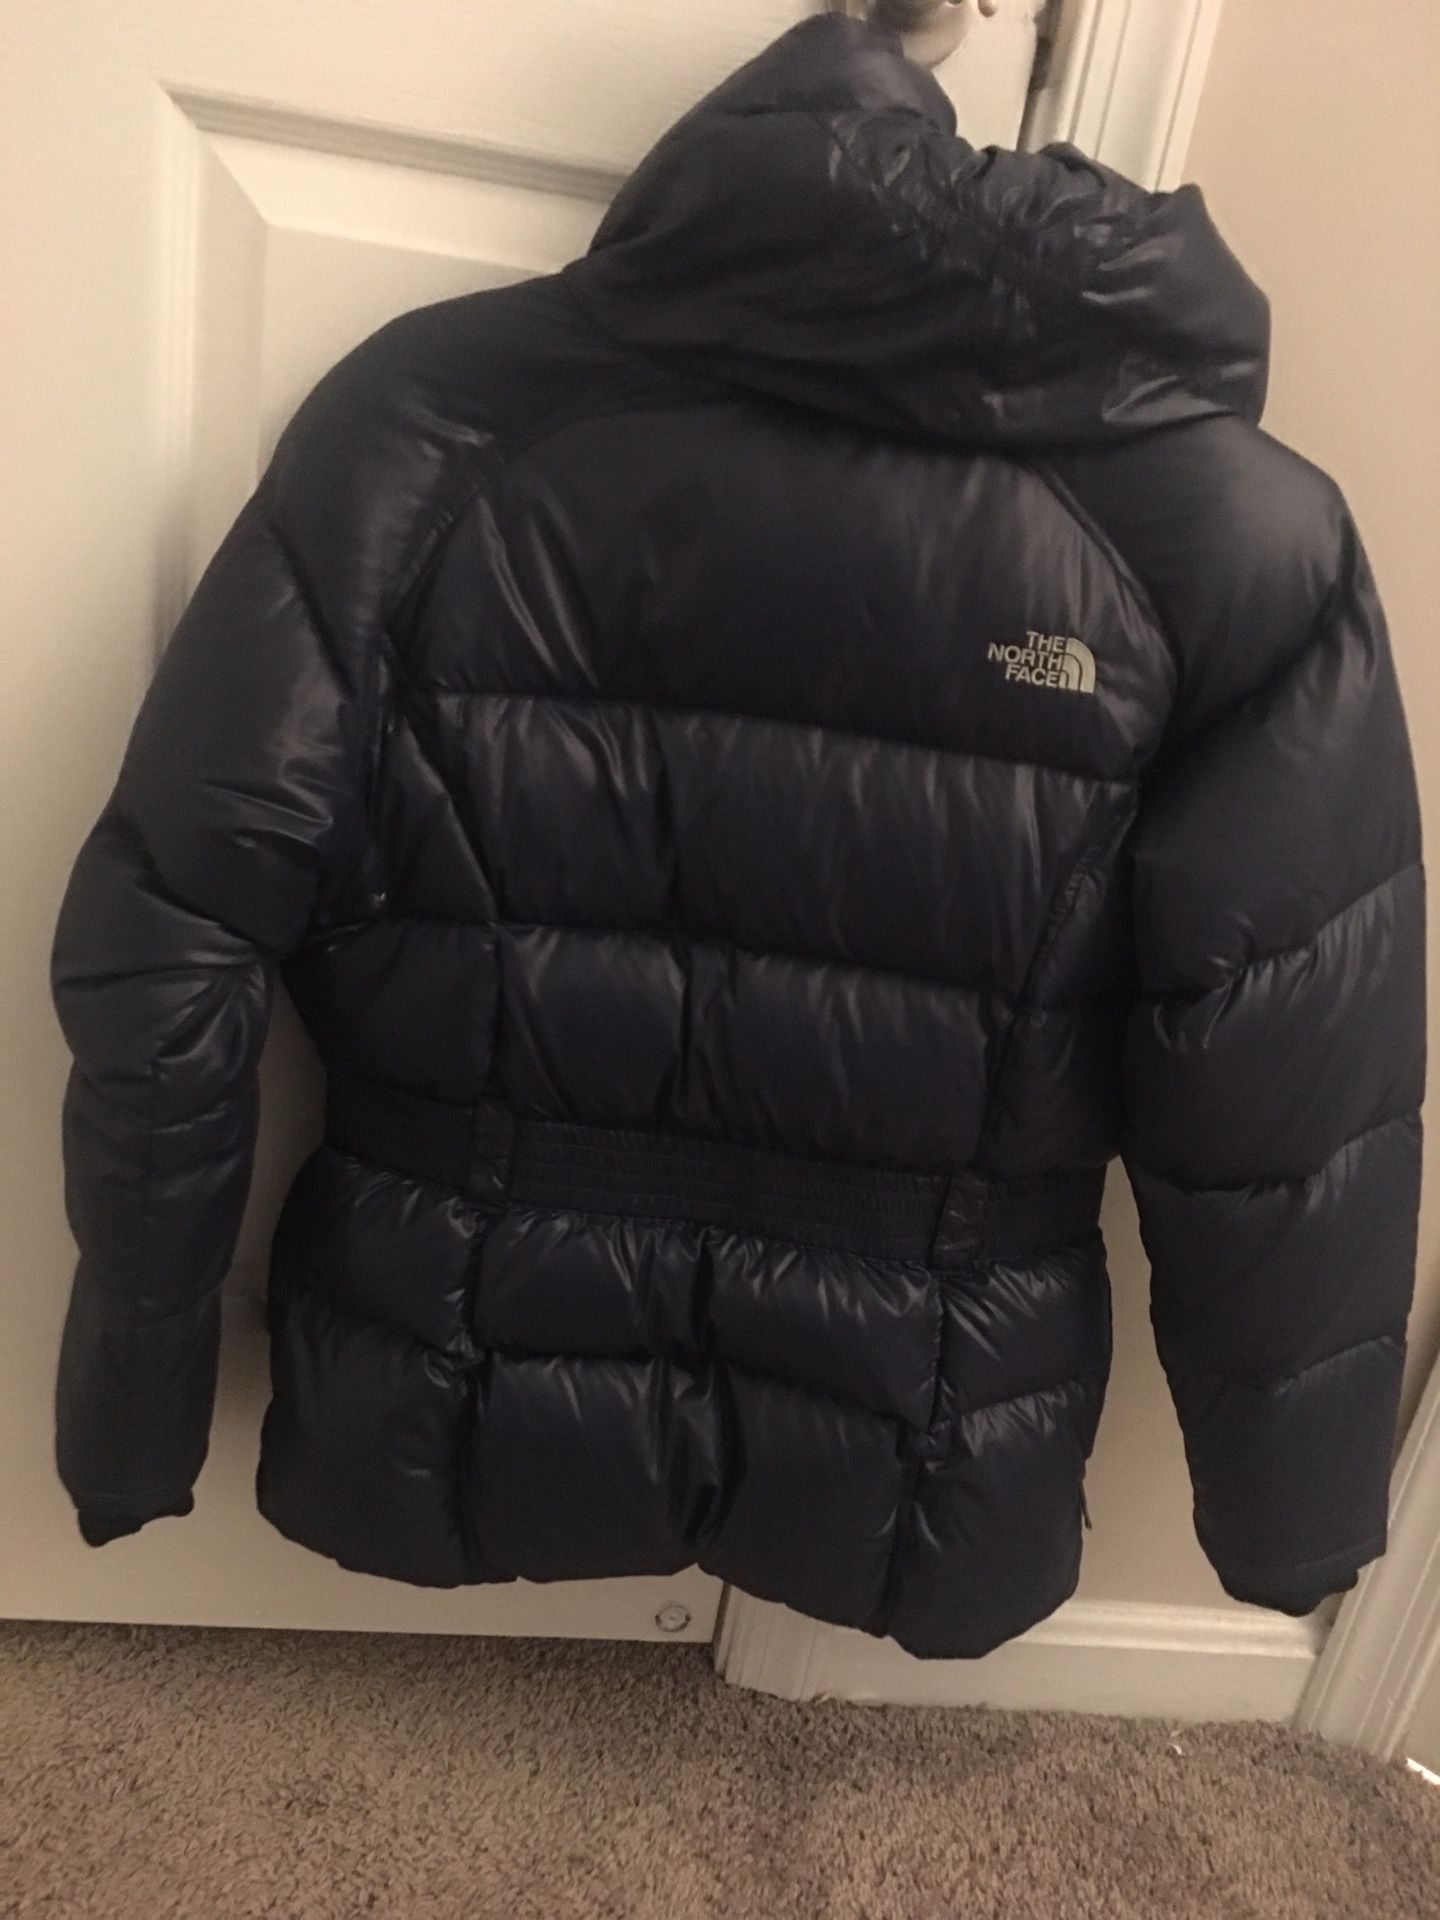 North face jacket (original brand as new)